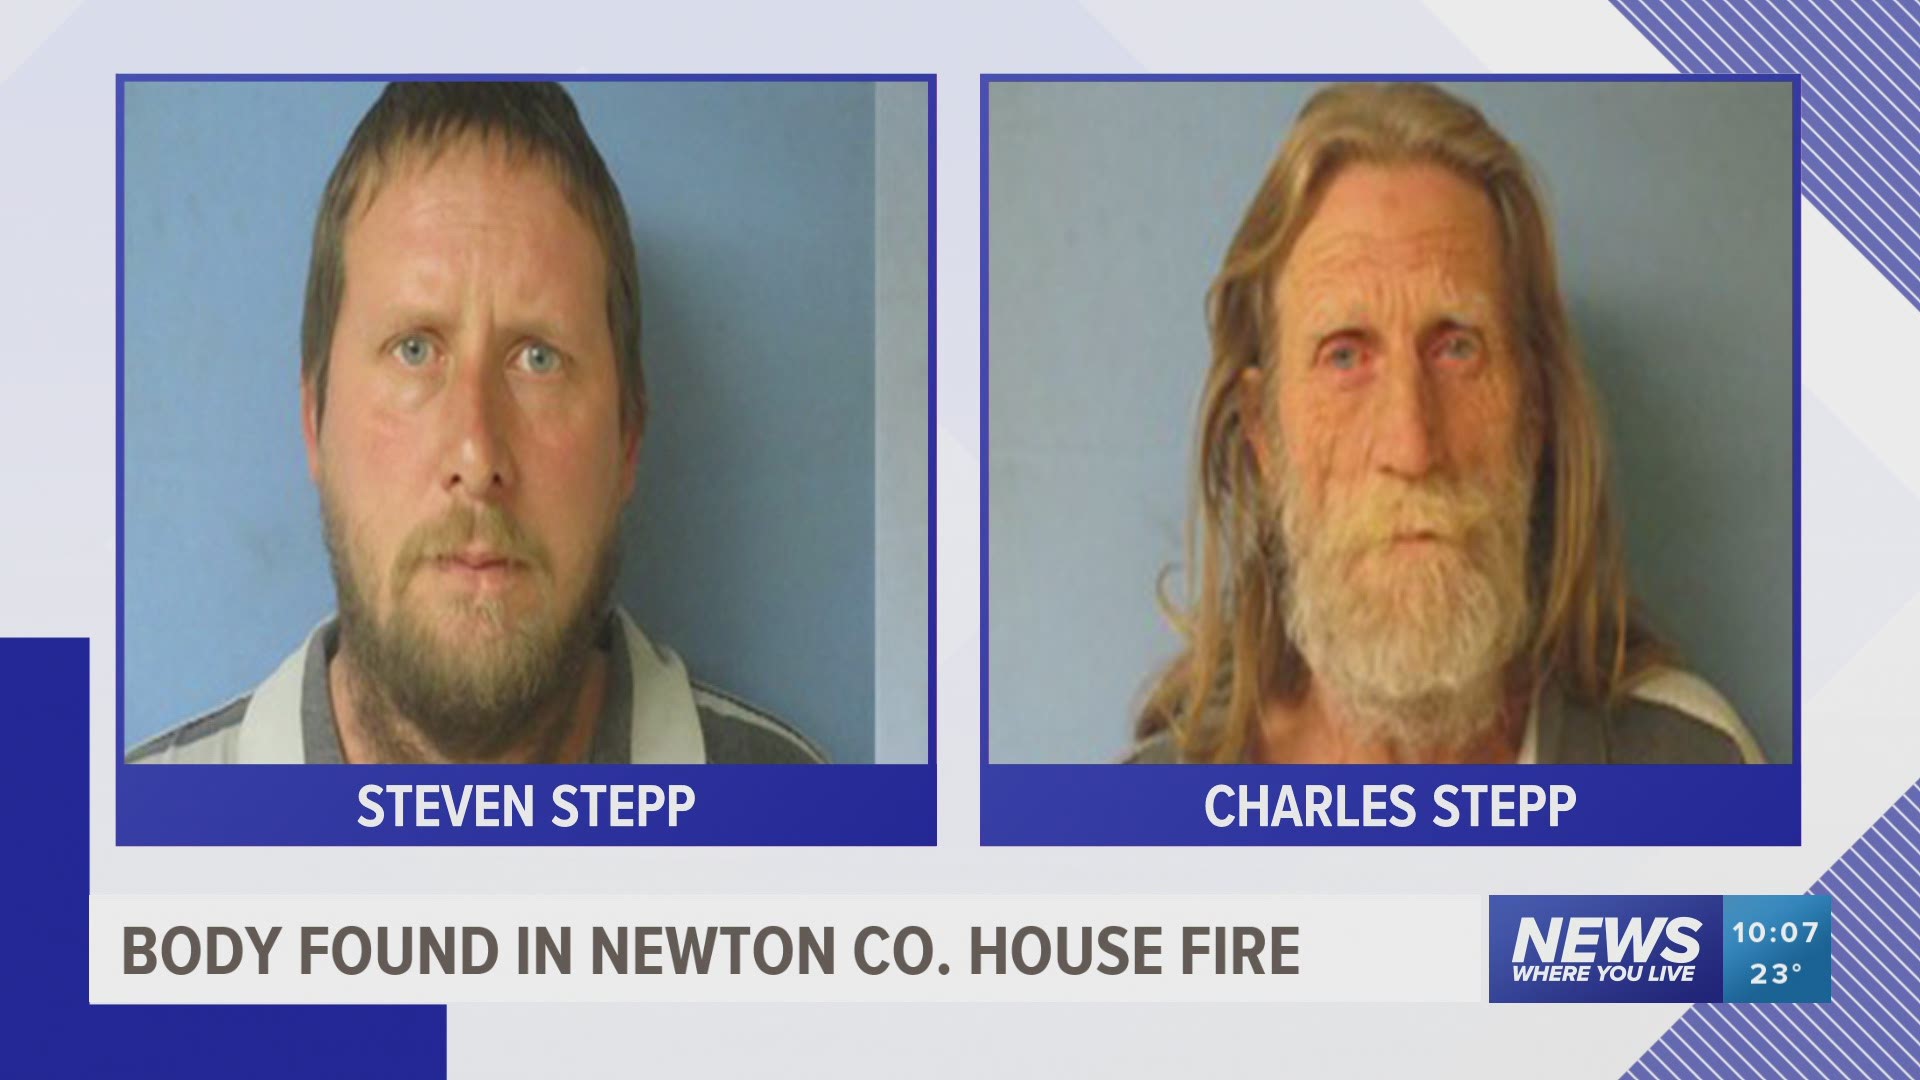 Body found in Newton Co. house fire, two arrested